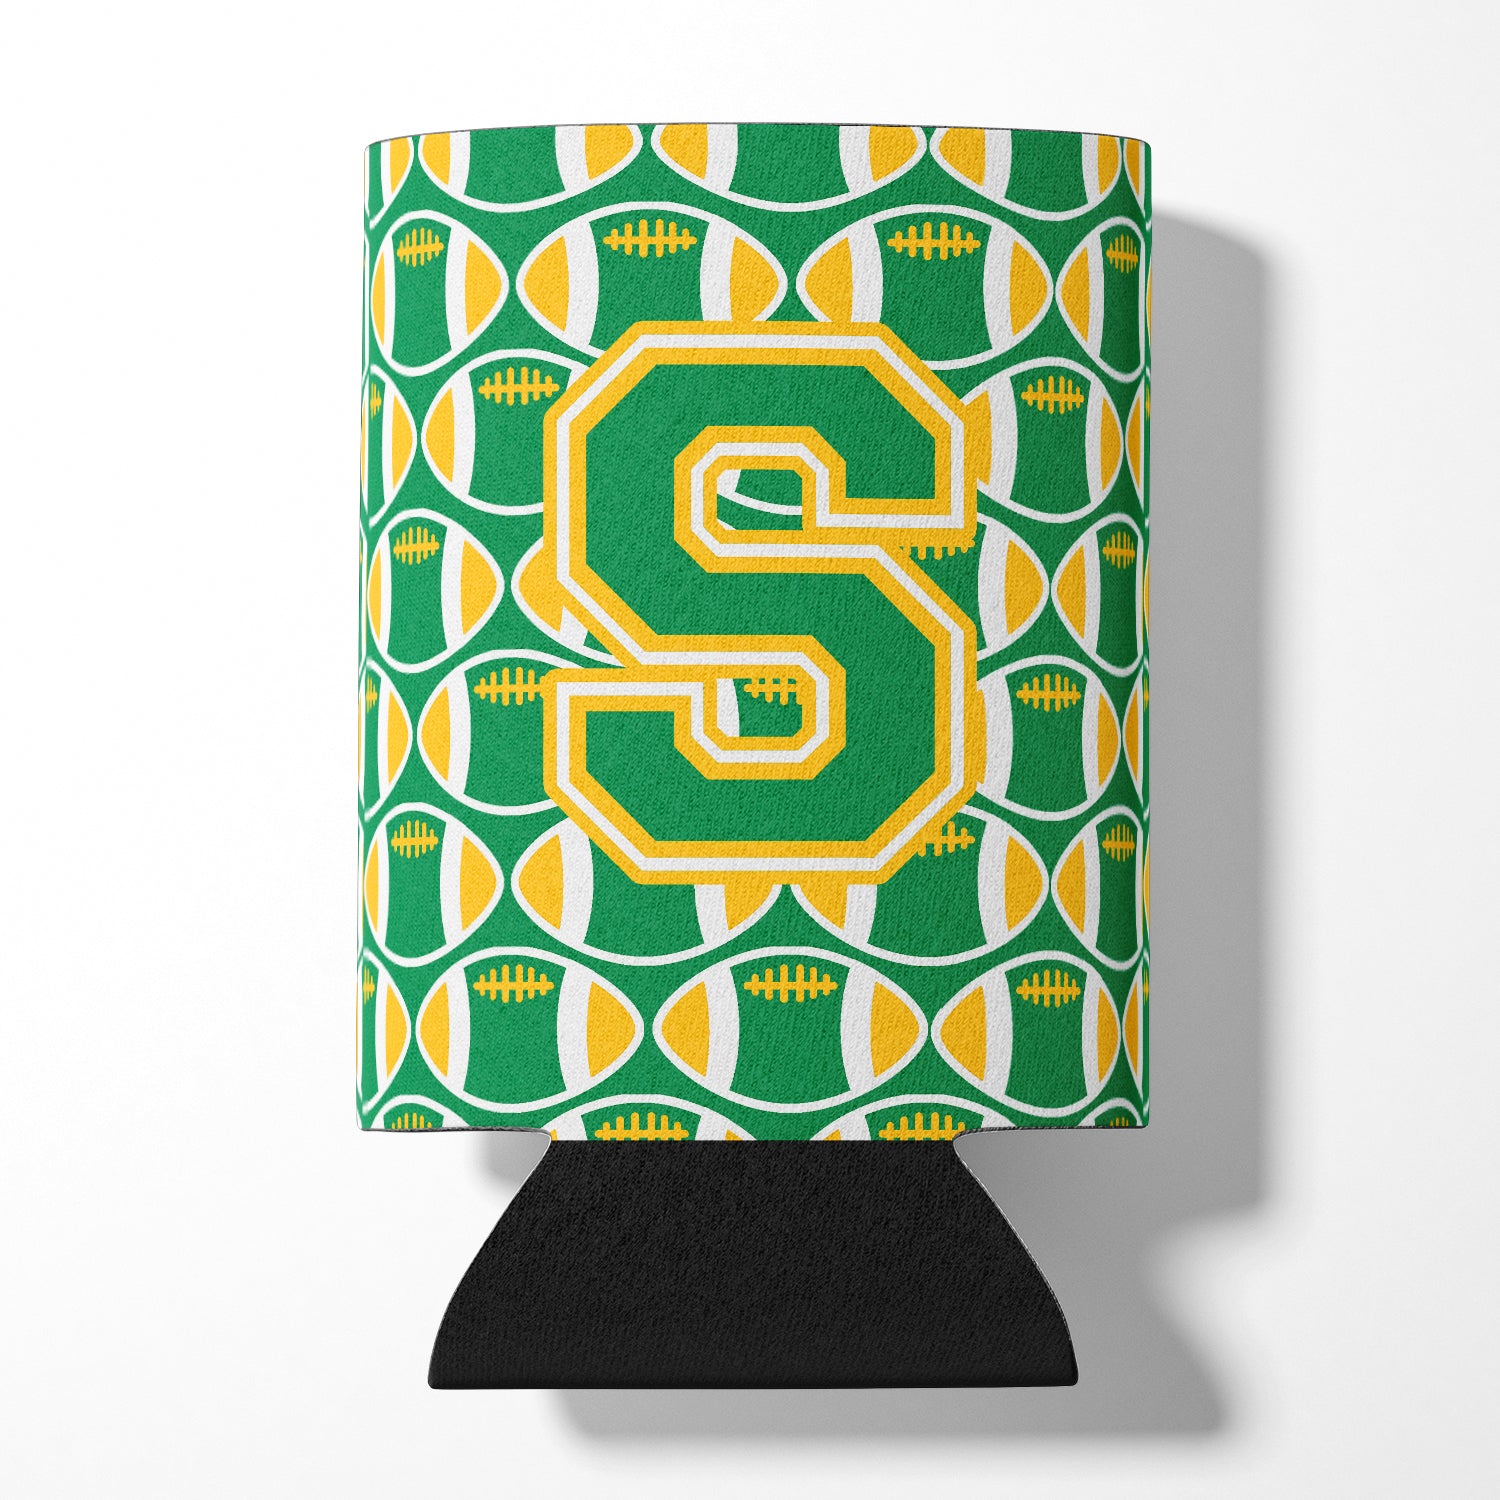 Letter S Football Green and Gold Can or Bottle Hugger CJ1069-SCC